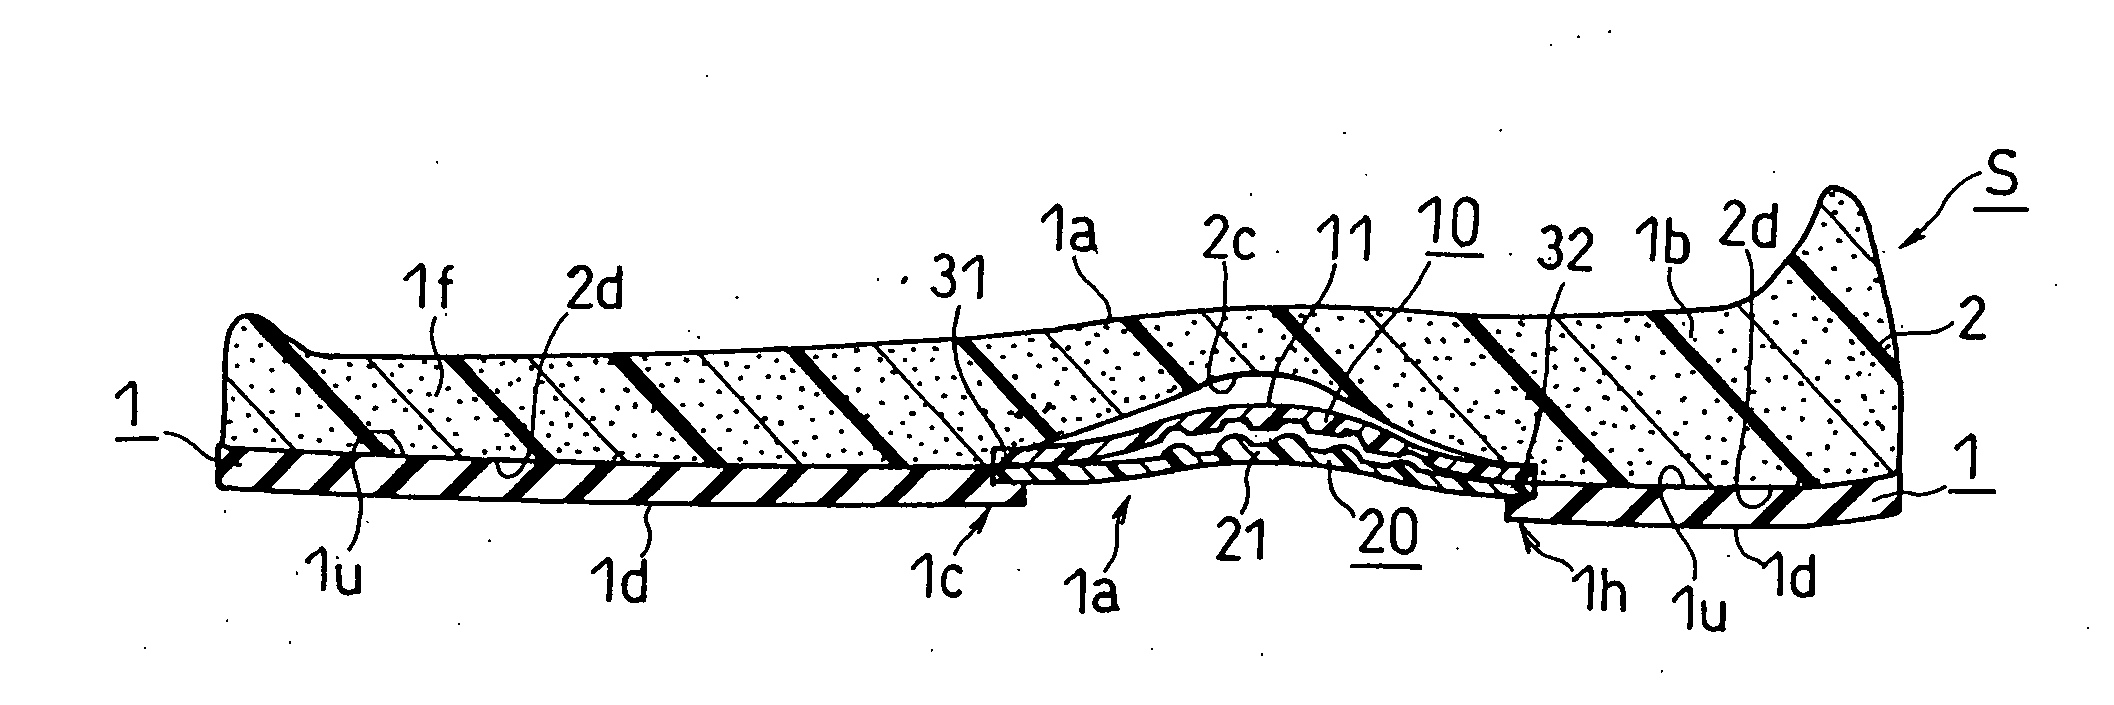 Shoe Sole with Reinforcement Structure